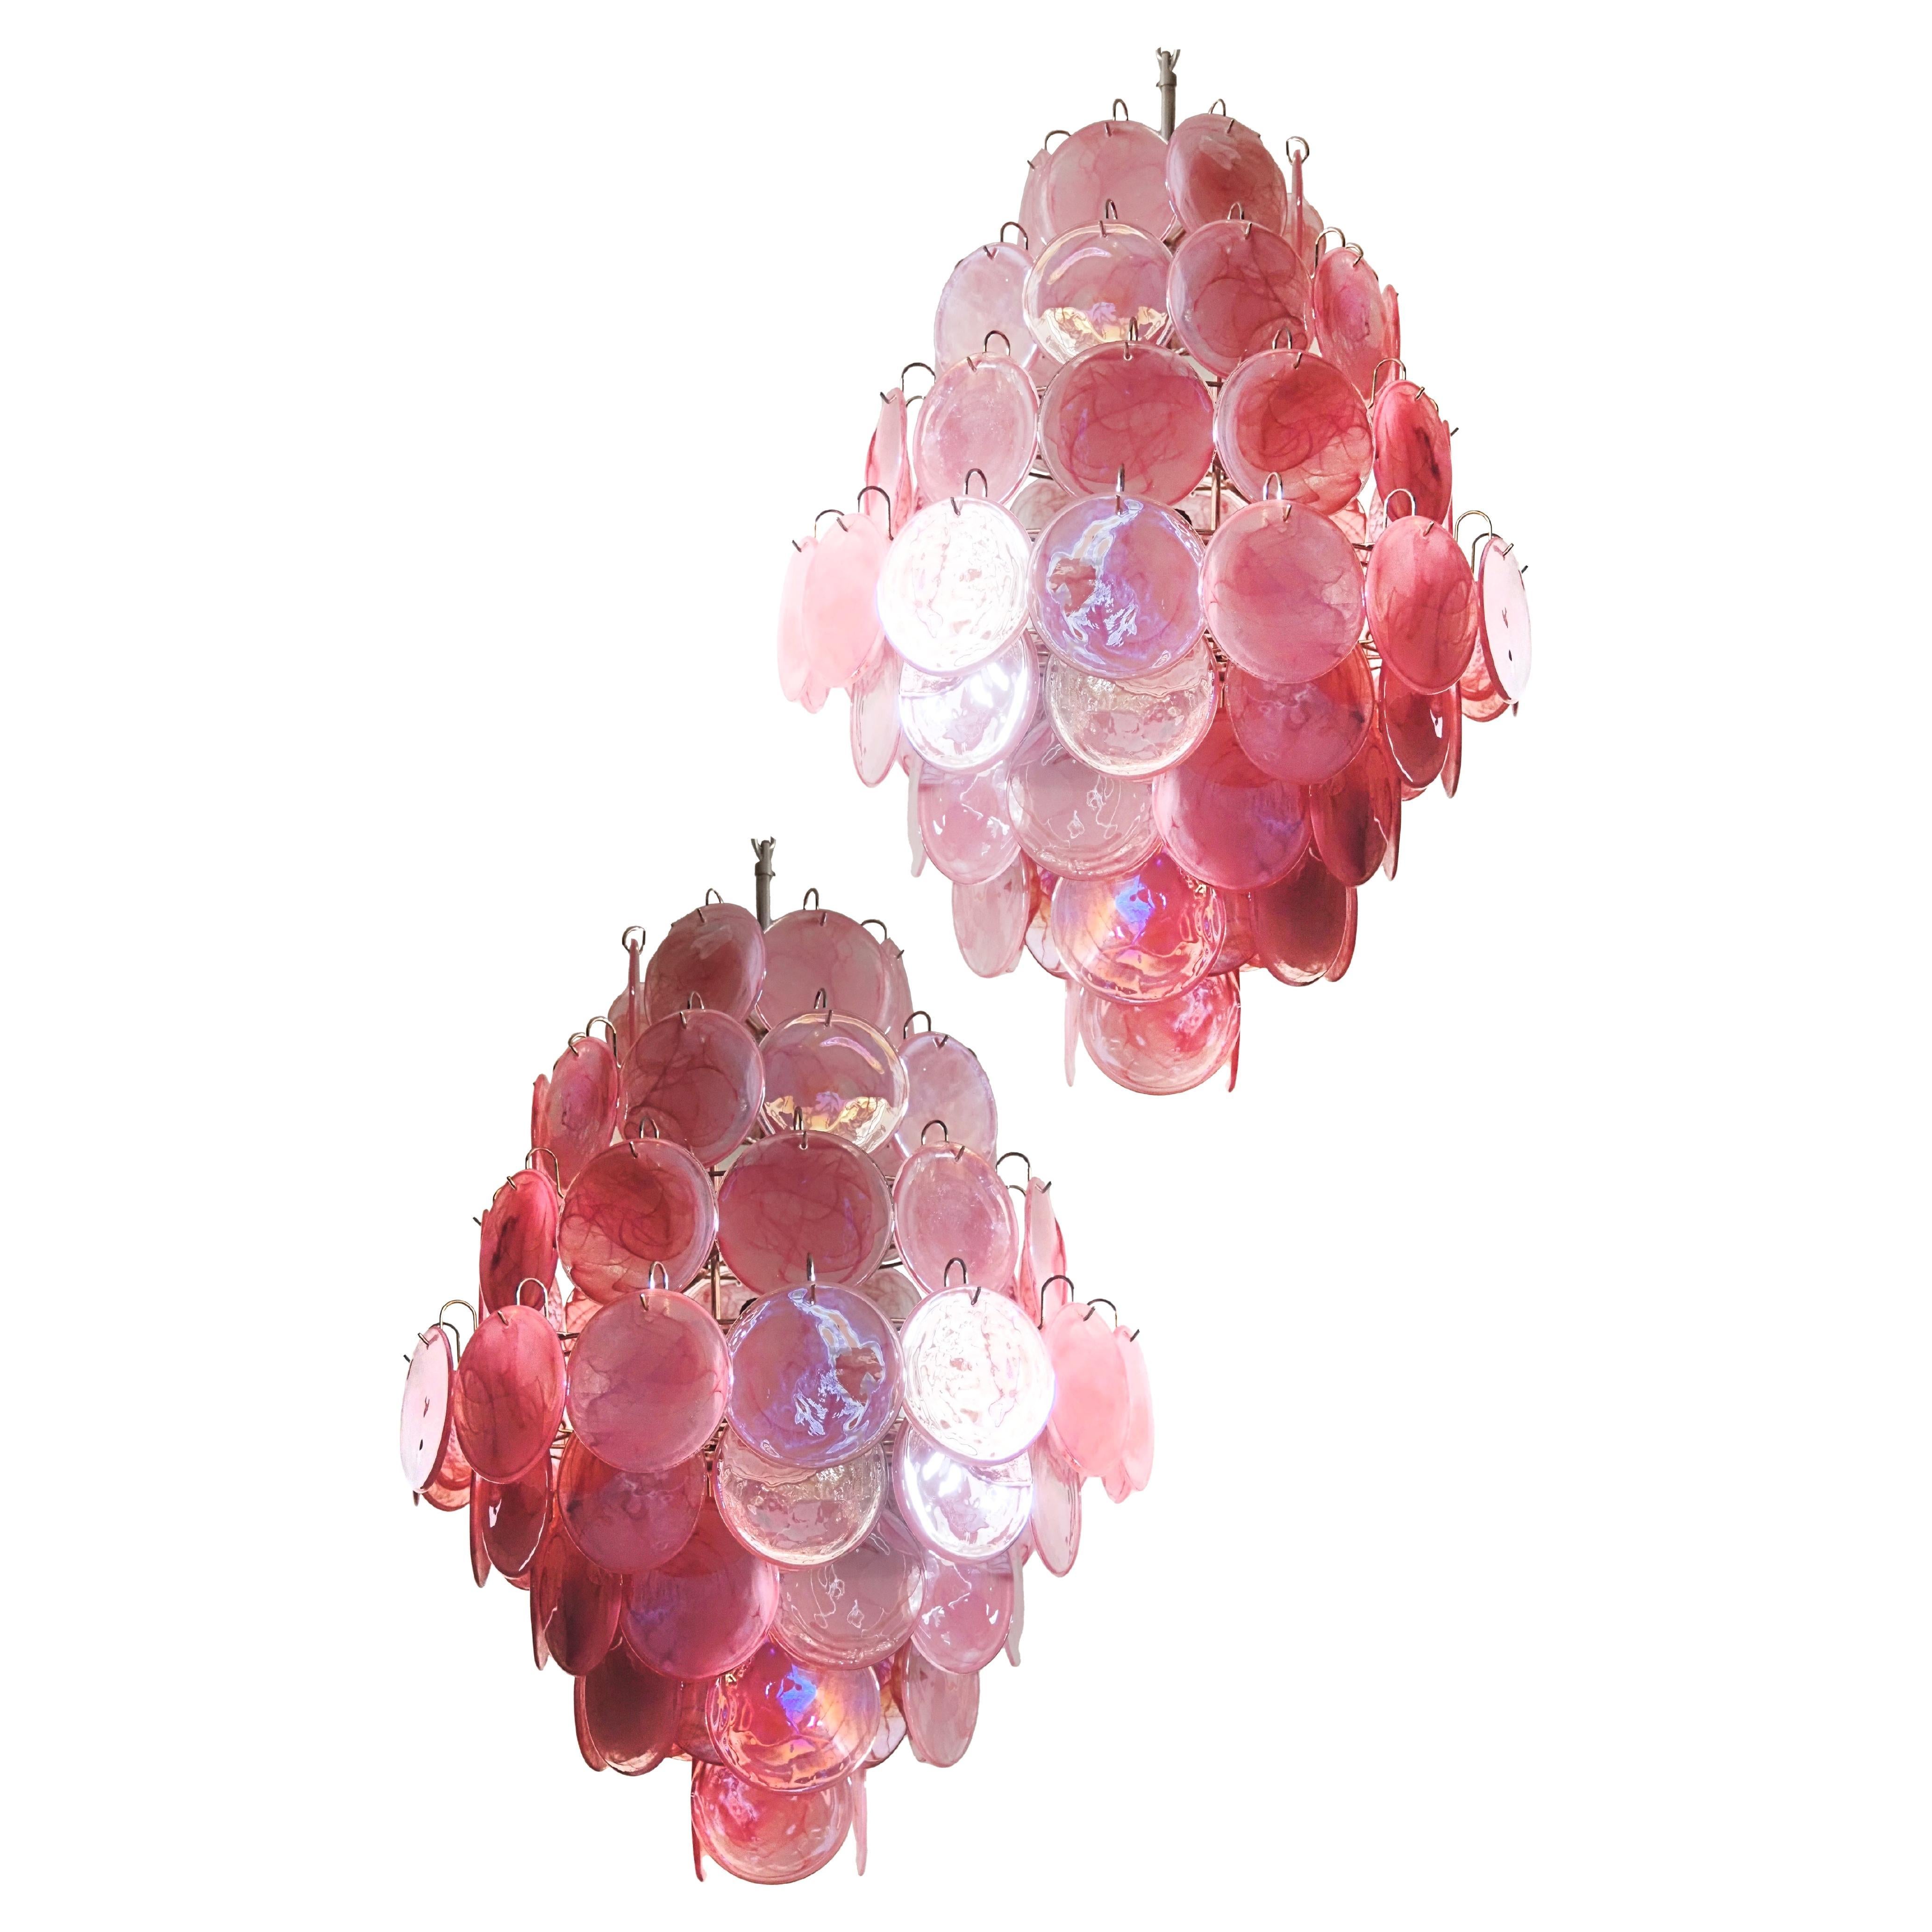 Huge Vintage Italian Murano chandeliers - 87 pink alabaster disks
Vintage Italian Murano chandeliers in Vistosi style. Each chandelier has 87 fantastic pink alabaster iridescent glasses in a nickel metal frame.
Period: late XX century
Dimensions: